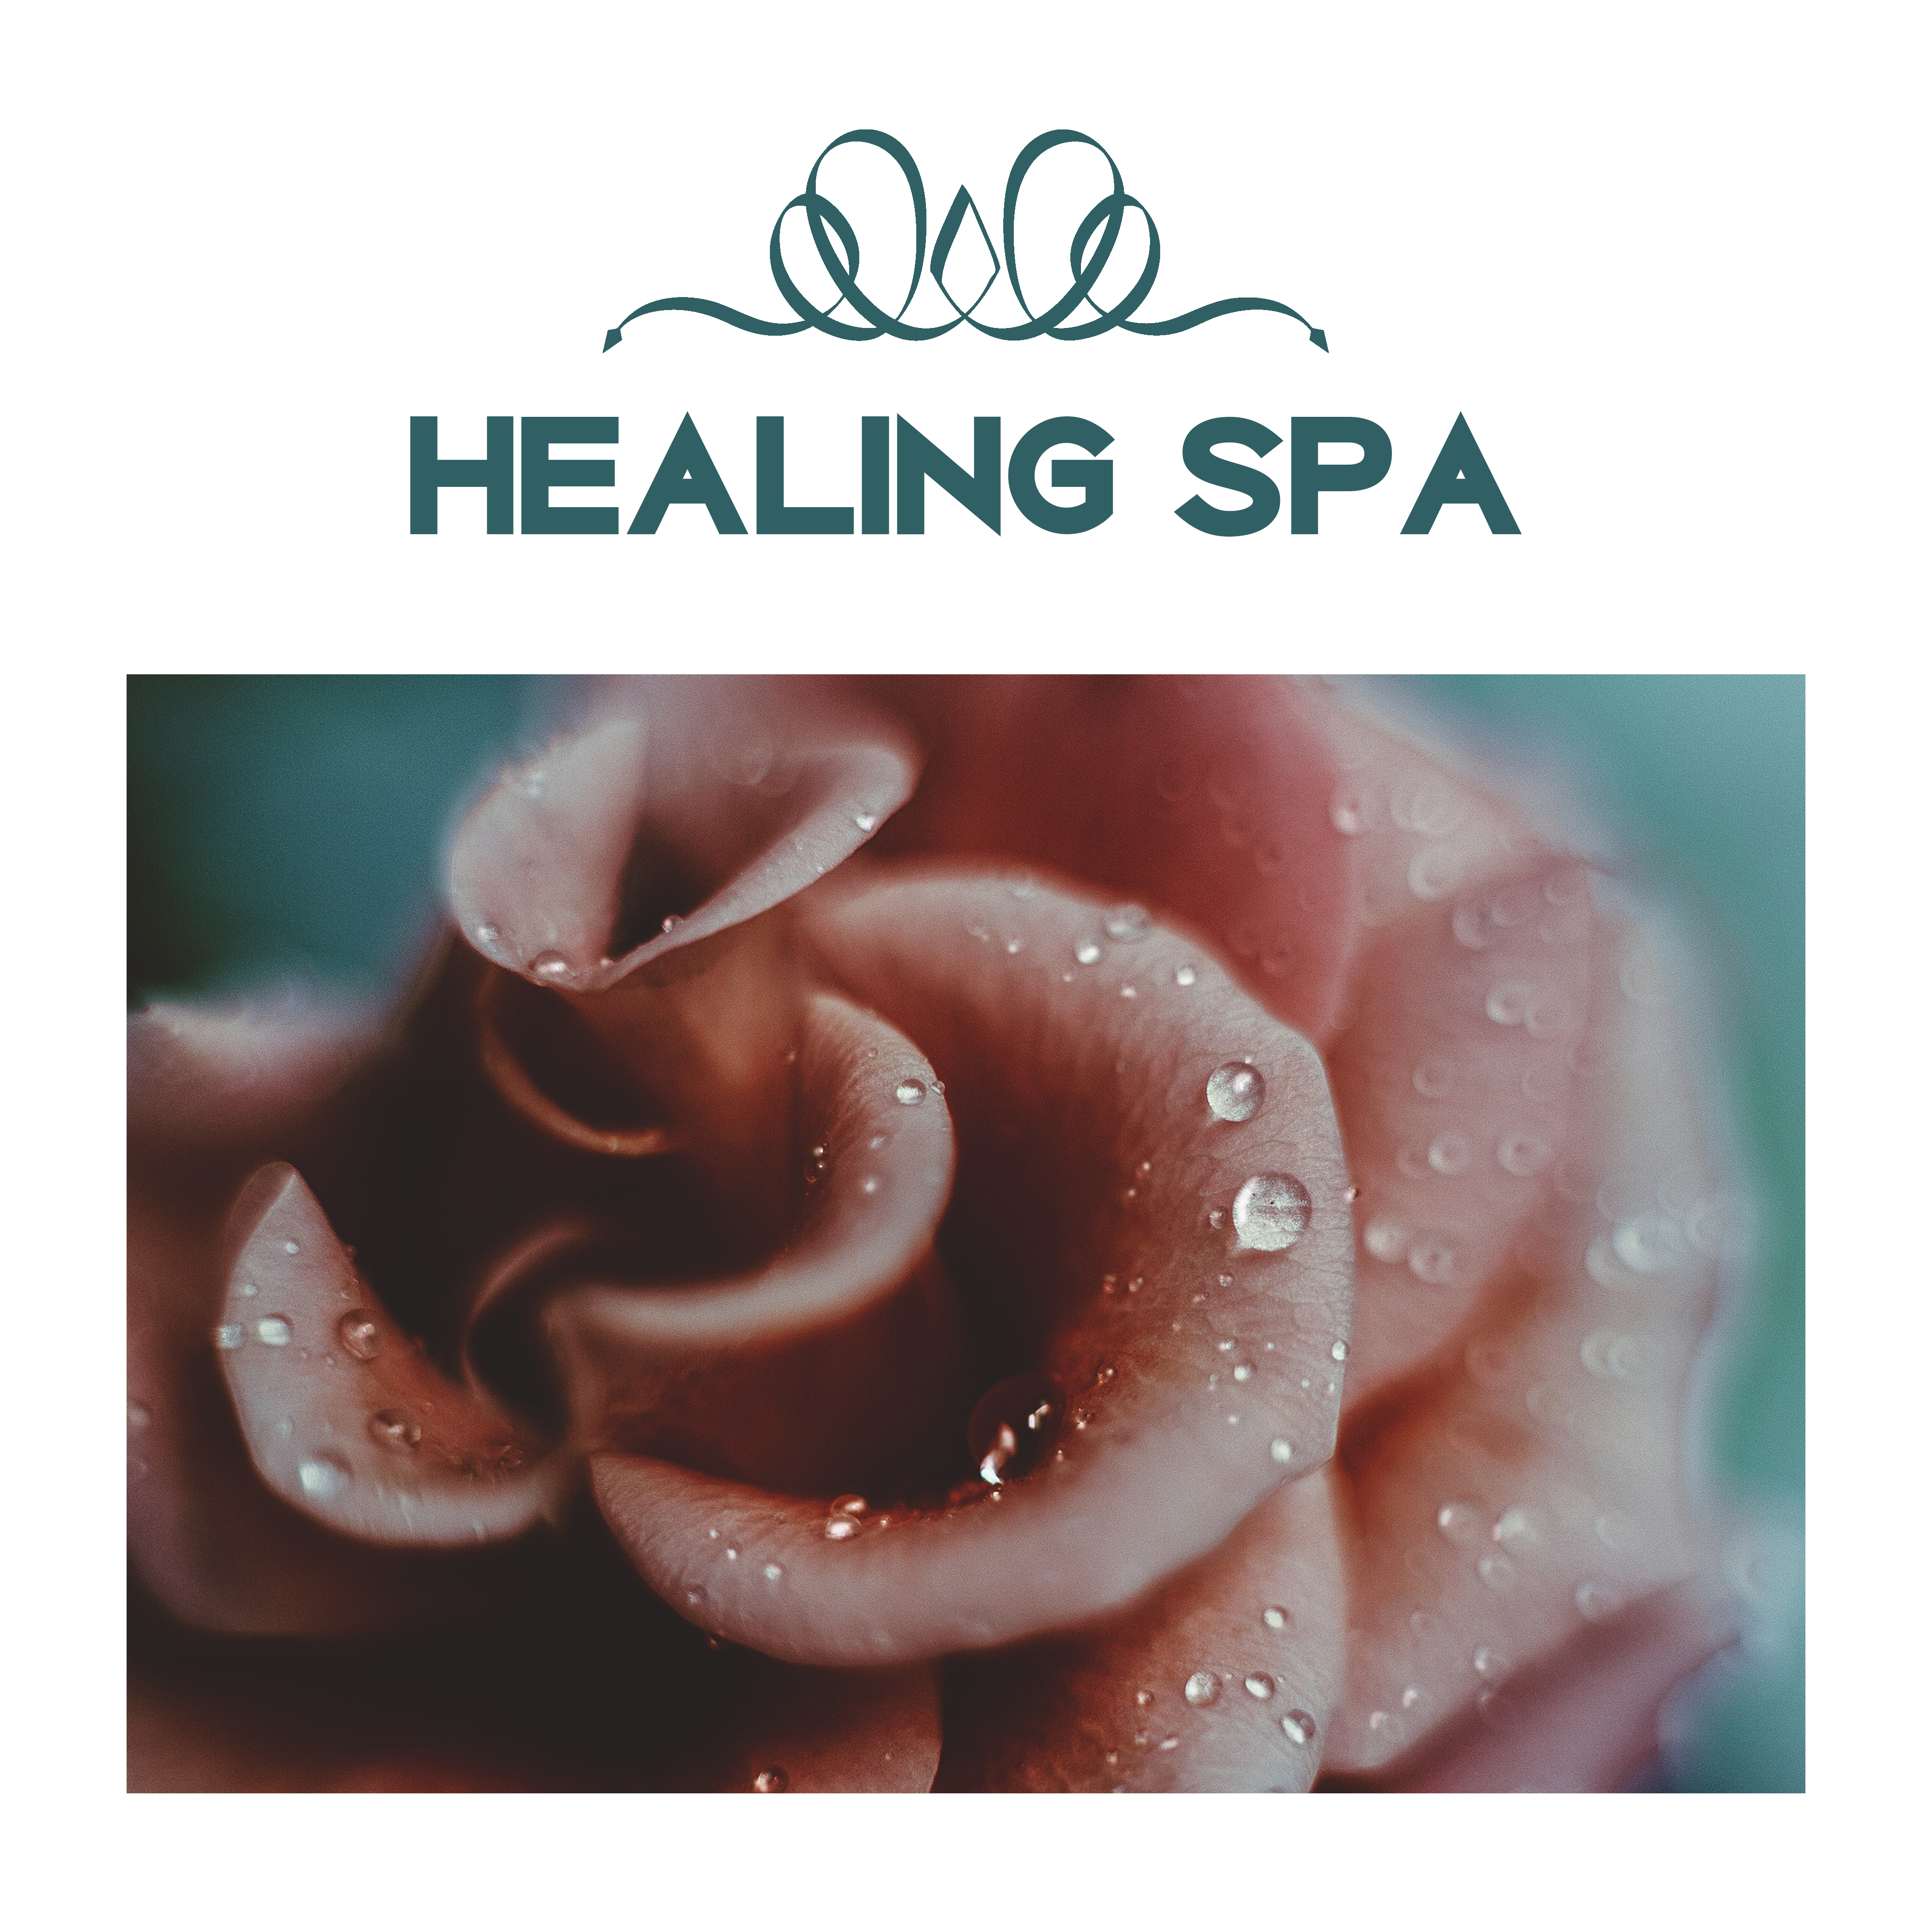 Healing Spa  Nature Sounds to Rest, Relief for Body, Pure Mind, Spa Music, Sensual Massage, Restful Therapy, Relax